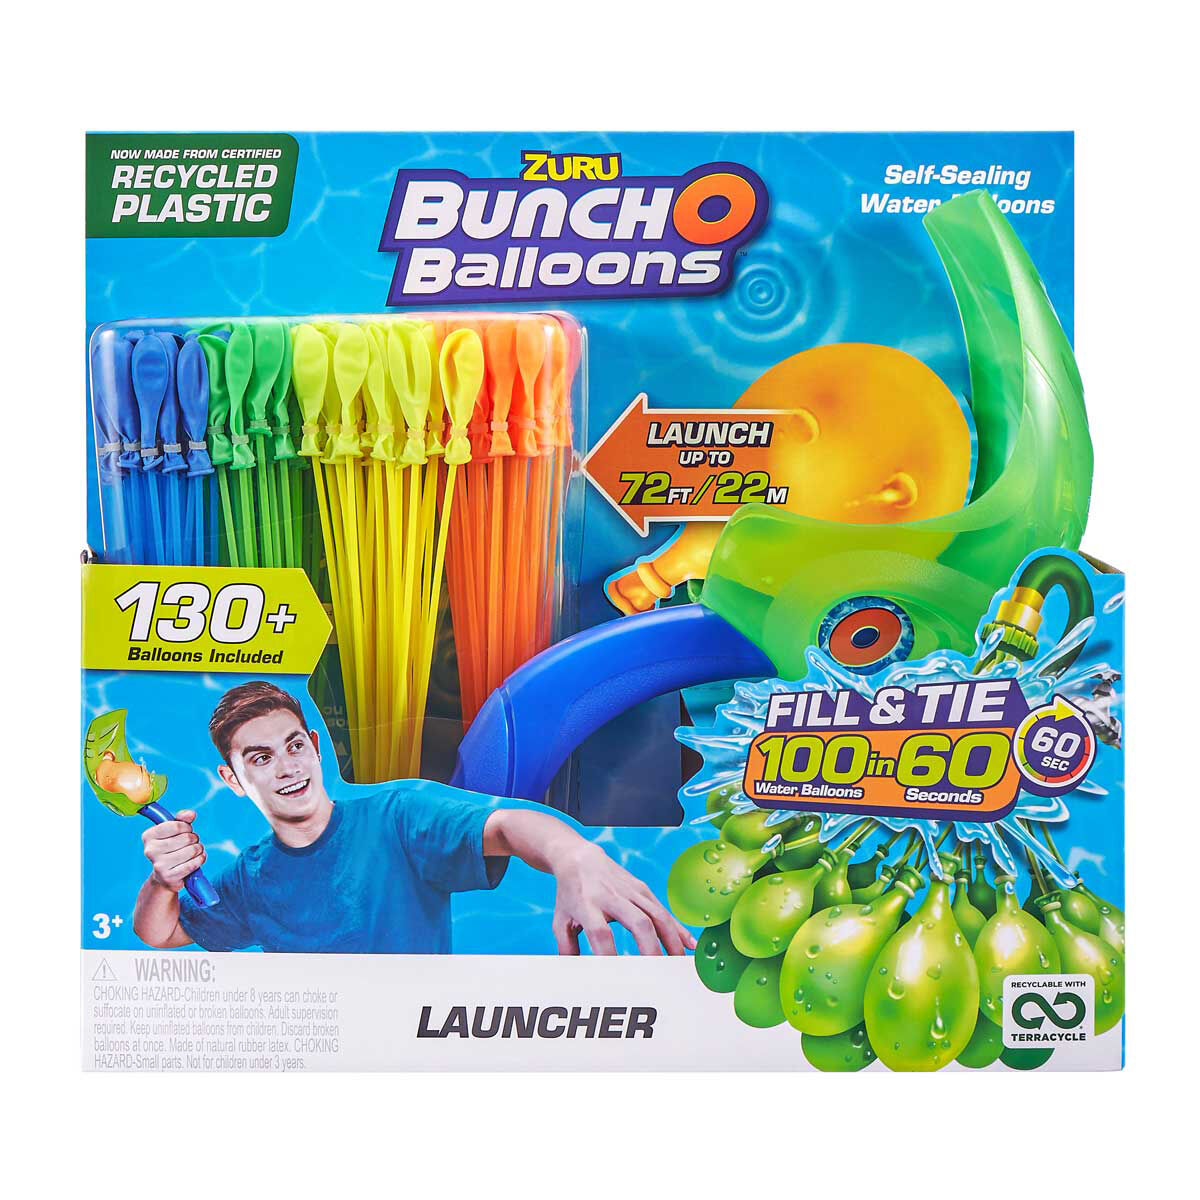 8 Bunch O Balloons Included in This Set Fill and Tie 100 Water Ballons in 60 Seconds ZURU Bunch O Balloons 